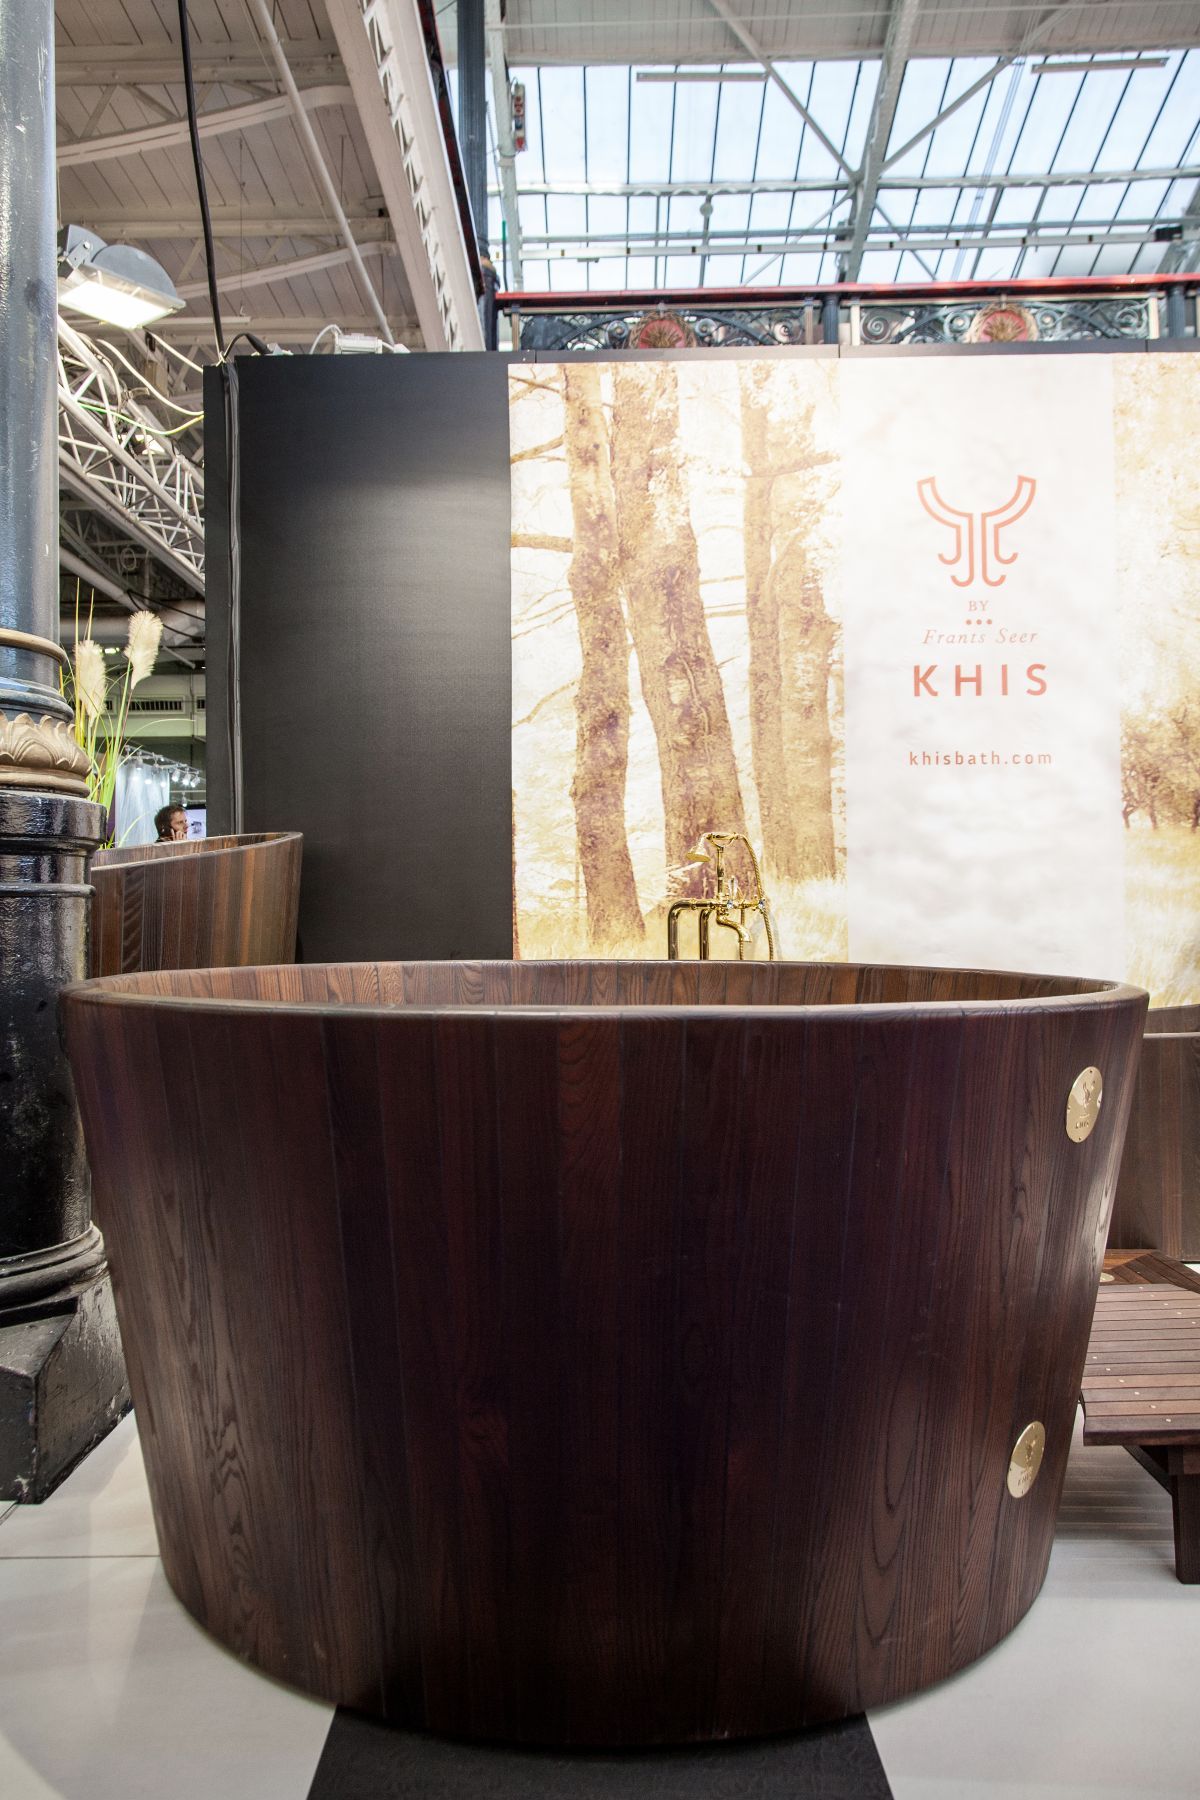 A KHIS wooden bathtub is dark brown, almost black because of the way the wood is thermally processed. Besides giving it a luxe look, the process makes it extraordinarily water-resistant and durable.